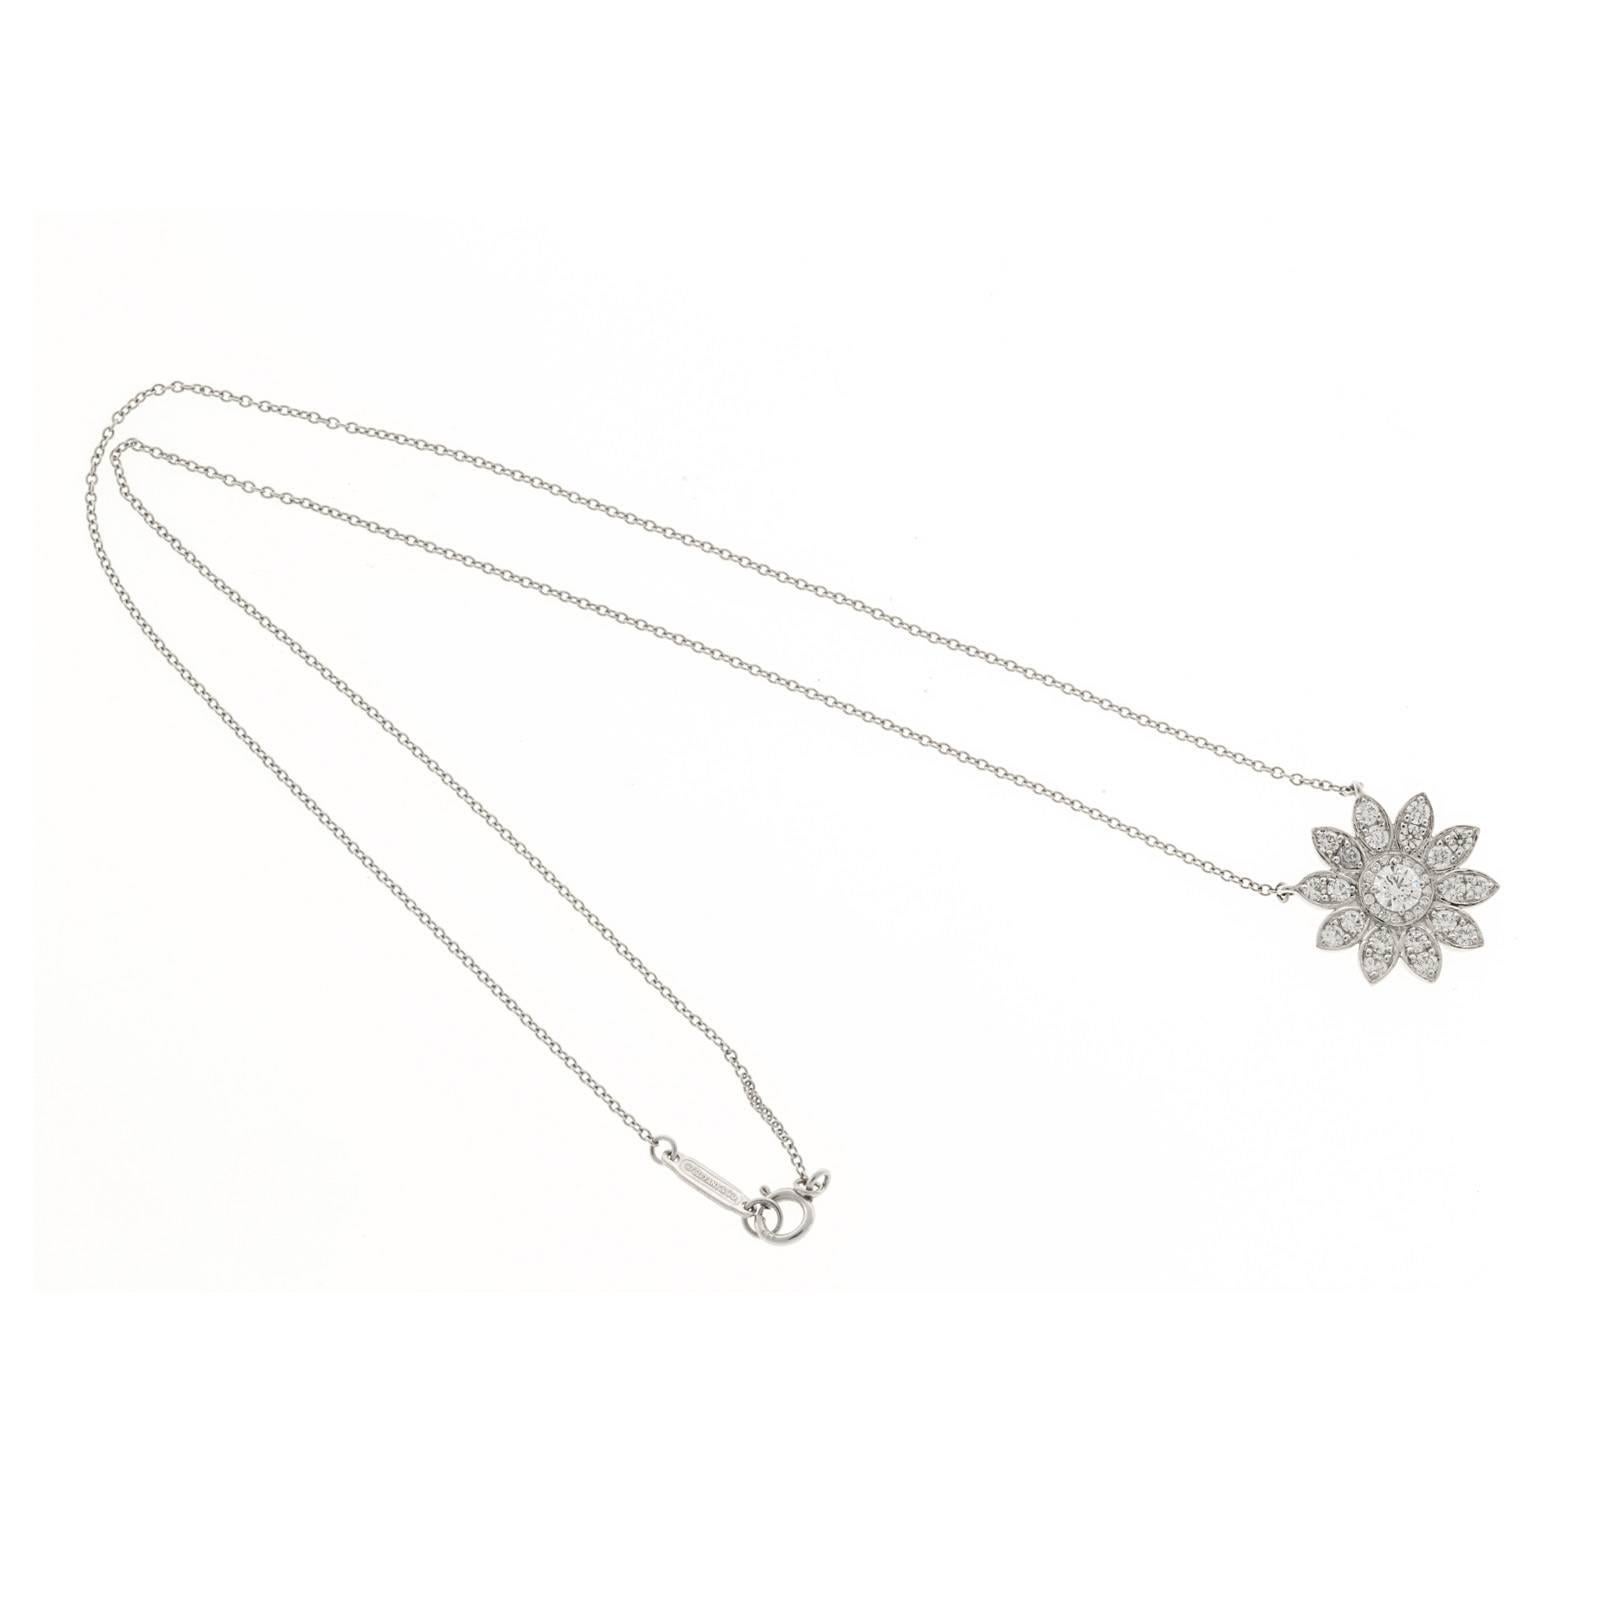 Tiffany & Co sunflower Platinum diamond necklace. Center diamond is surrounded by a circle of small full cut diamonds and diamond set flower petal.

1 round diamond, approx. total weight .18cts, F, VS
35 round diamonds, approx. total weight